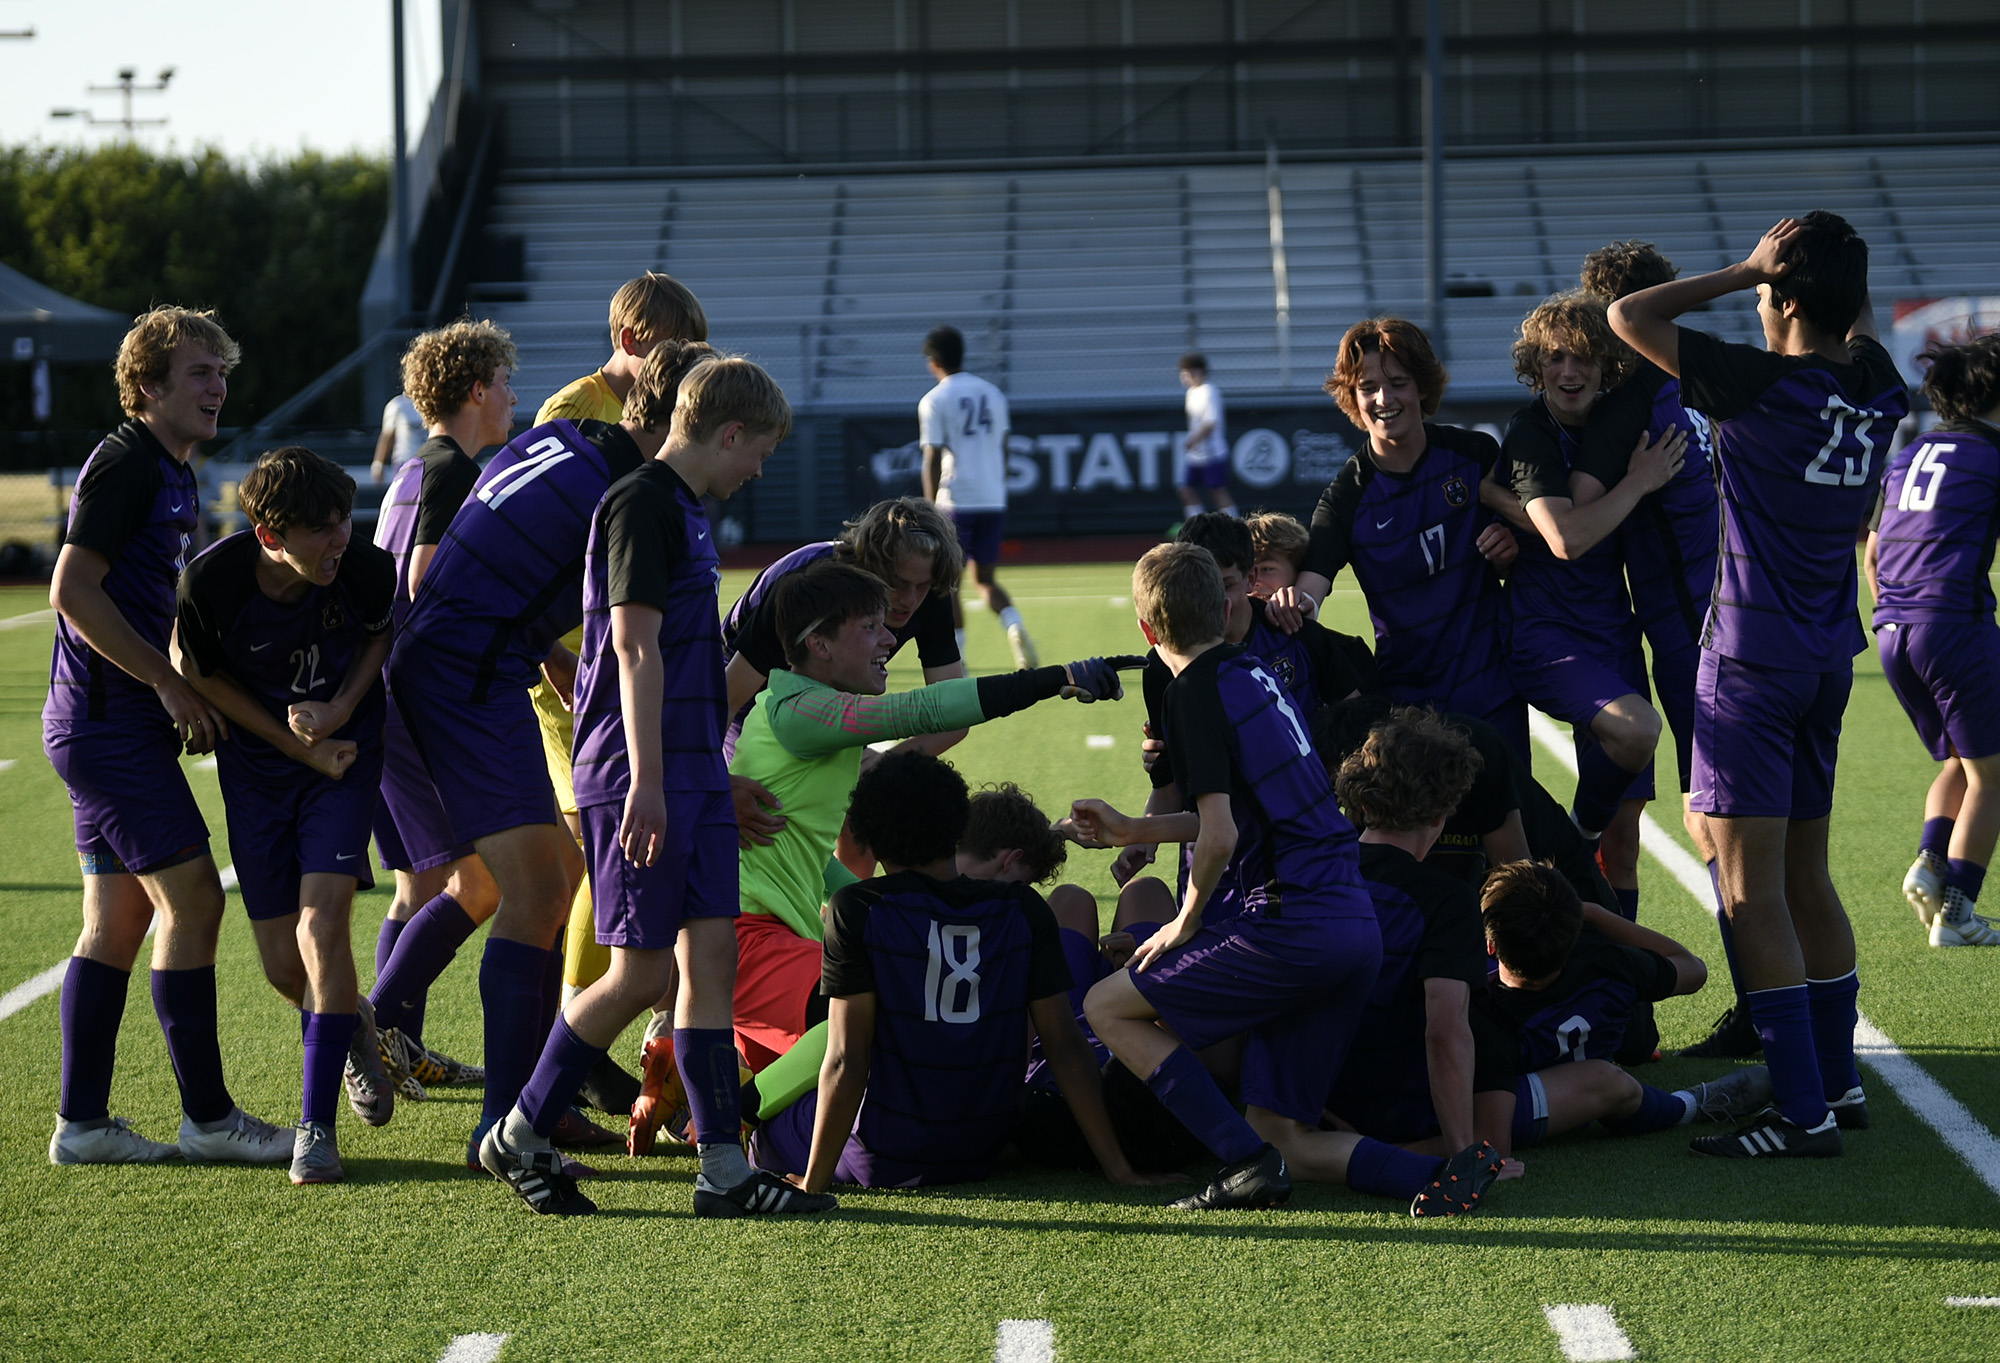 Columbia River boys soccer state championship match photo gallery